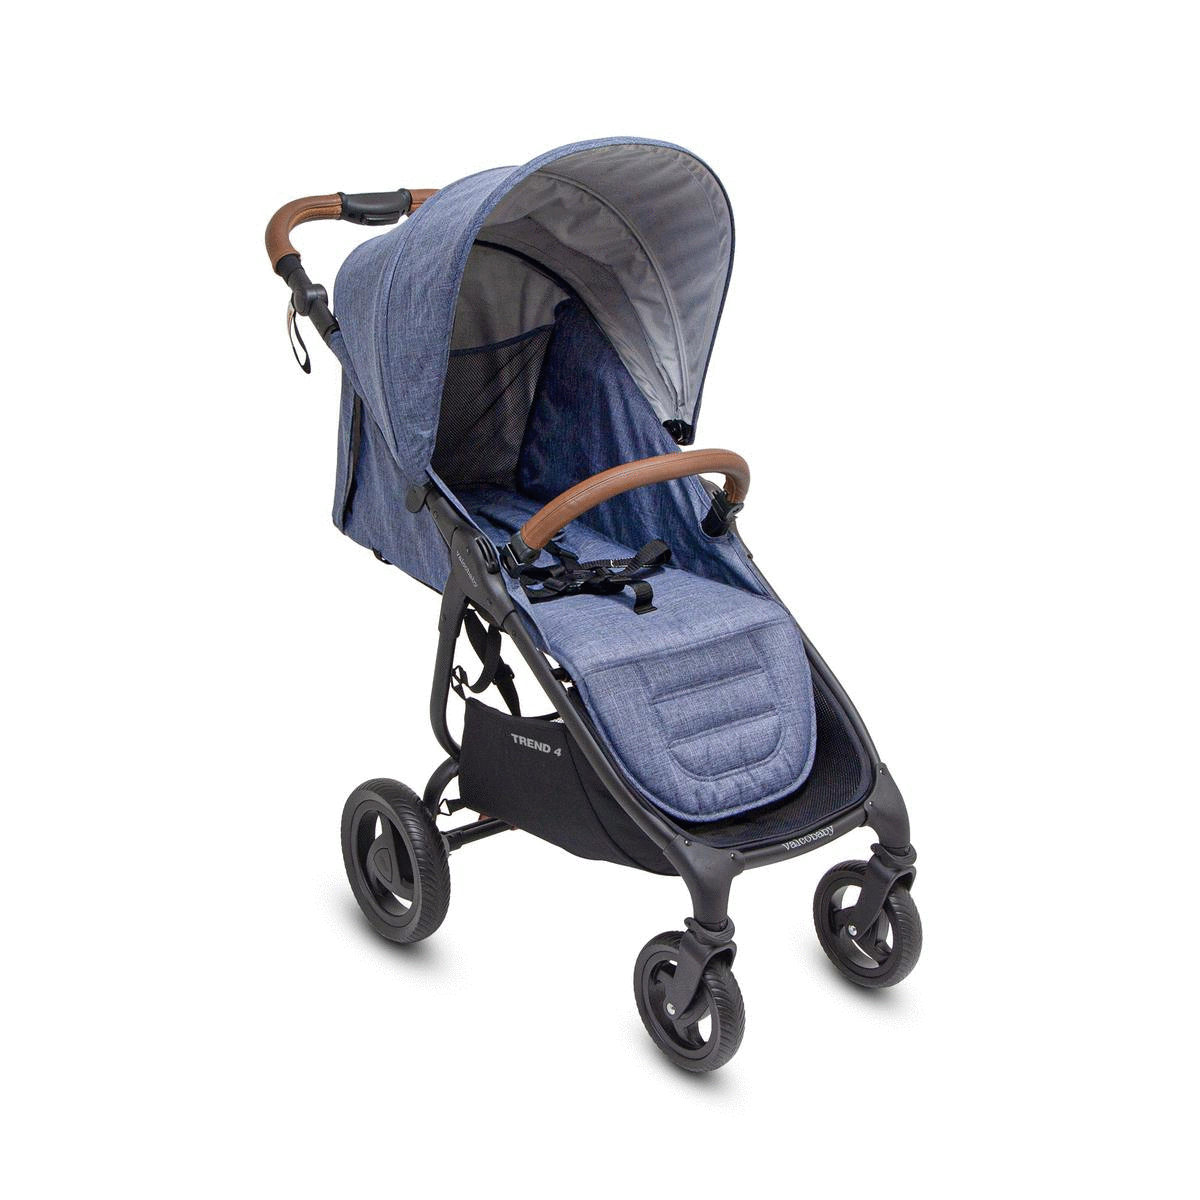 Valco Baby Snap 4 Trend Compact Fold Lightweight Single Stroller Charcoal NEW 